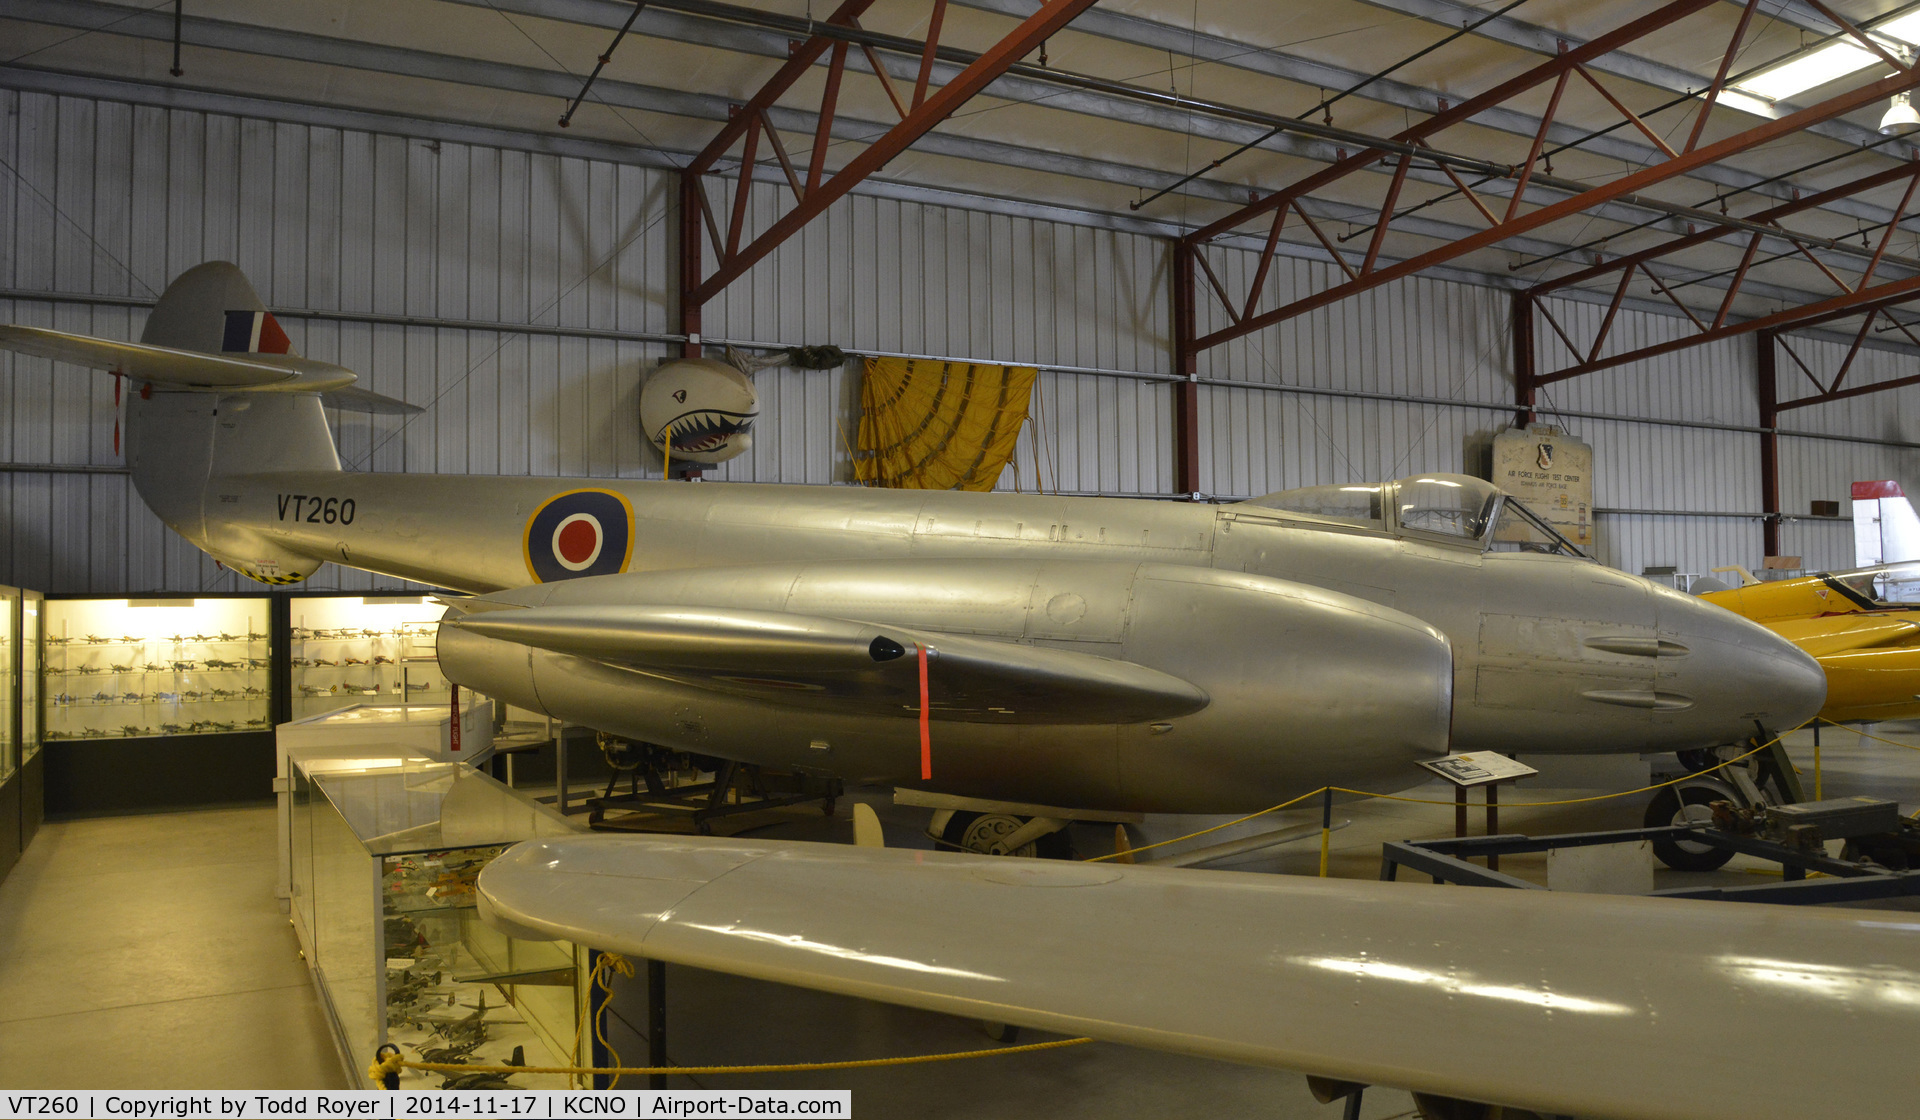 VT260, Gloster Meteor F.4 C/N Not found VT260, On display at the Planes of Fame Chino location